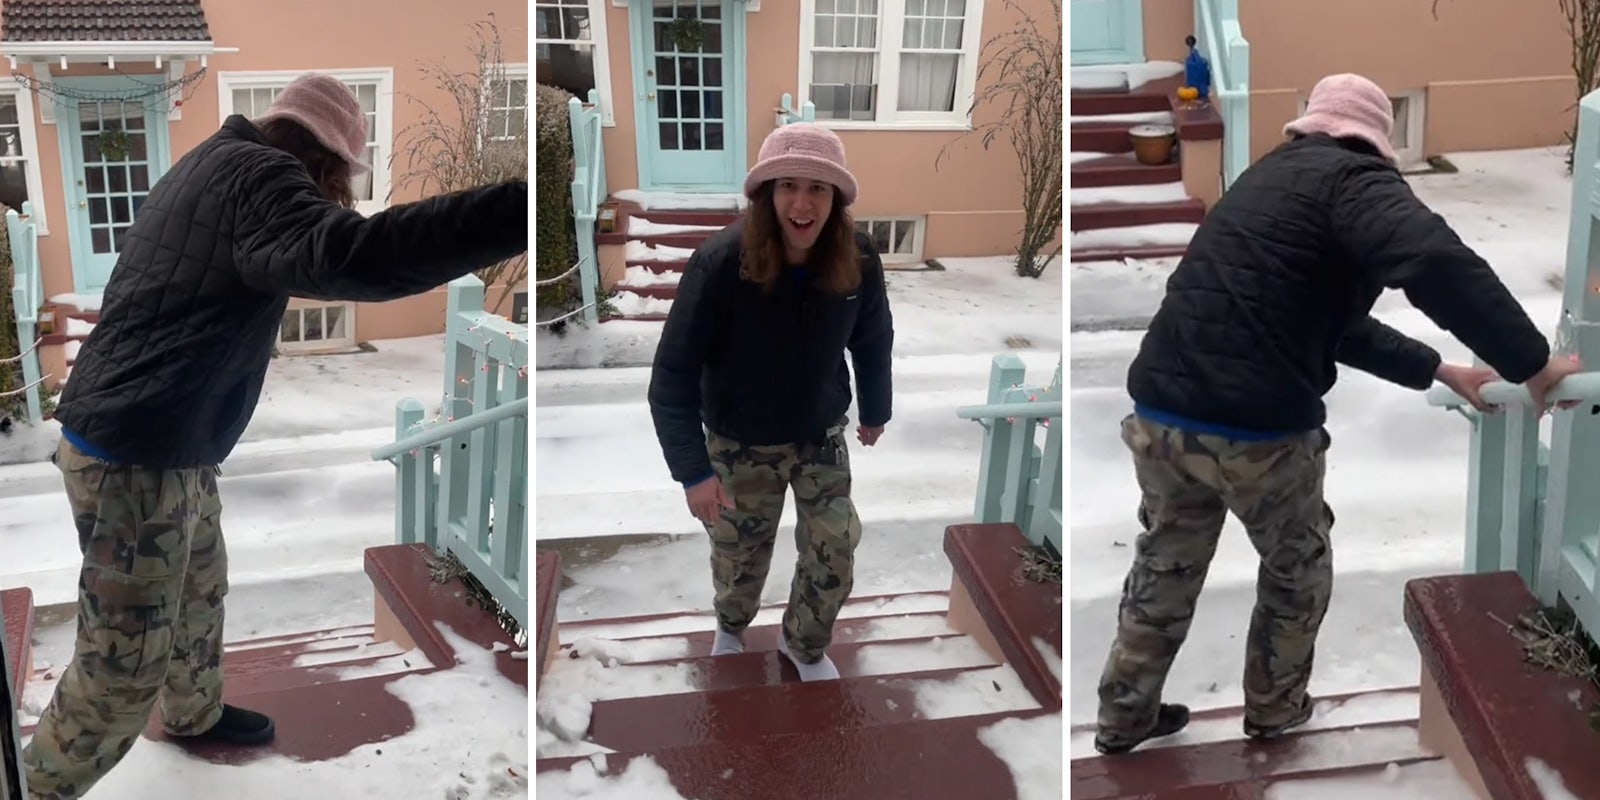 Man shares hack for how to walk on ice without slipping